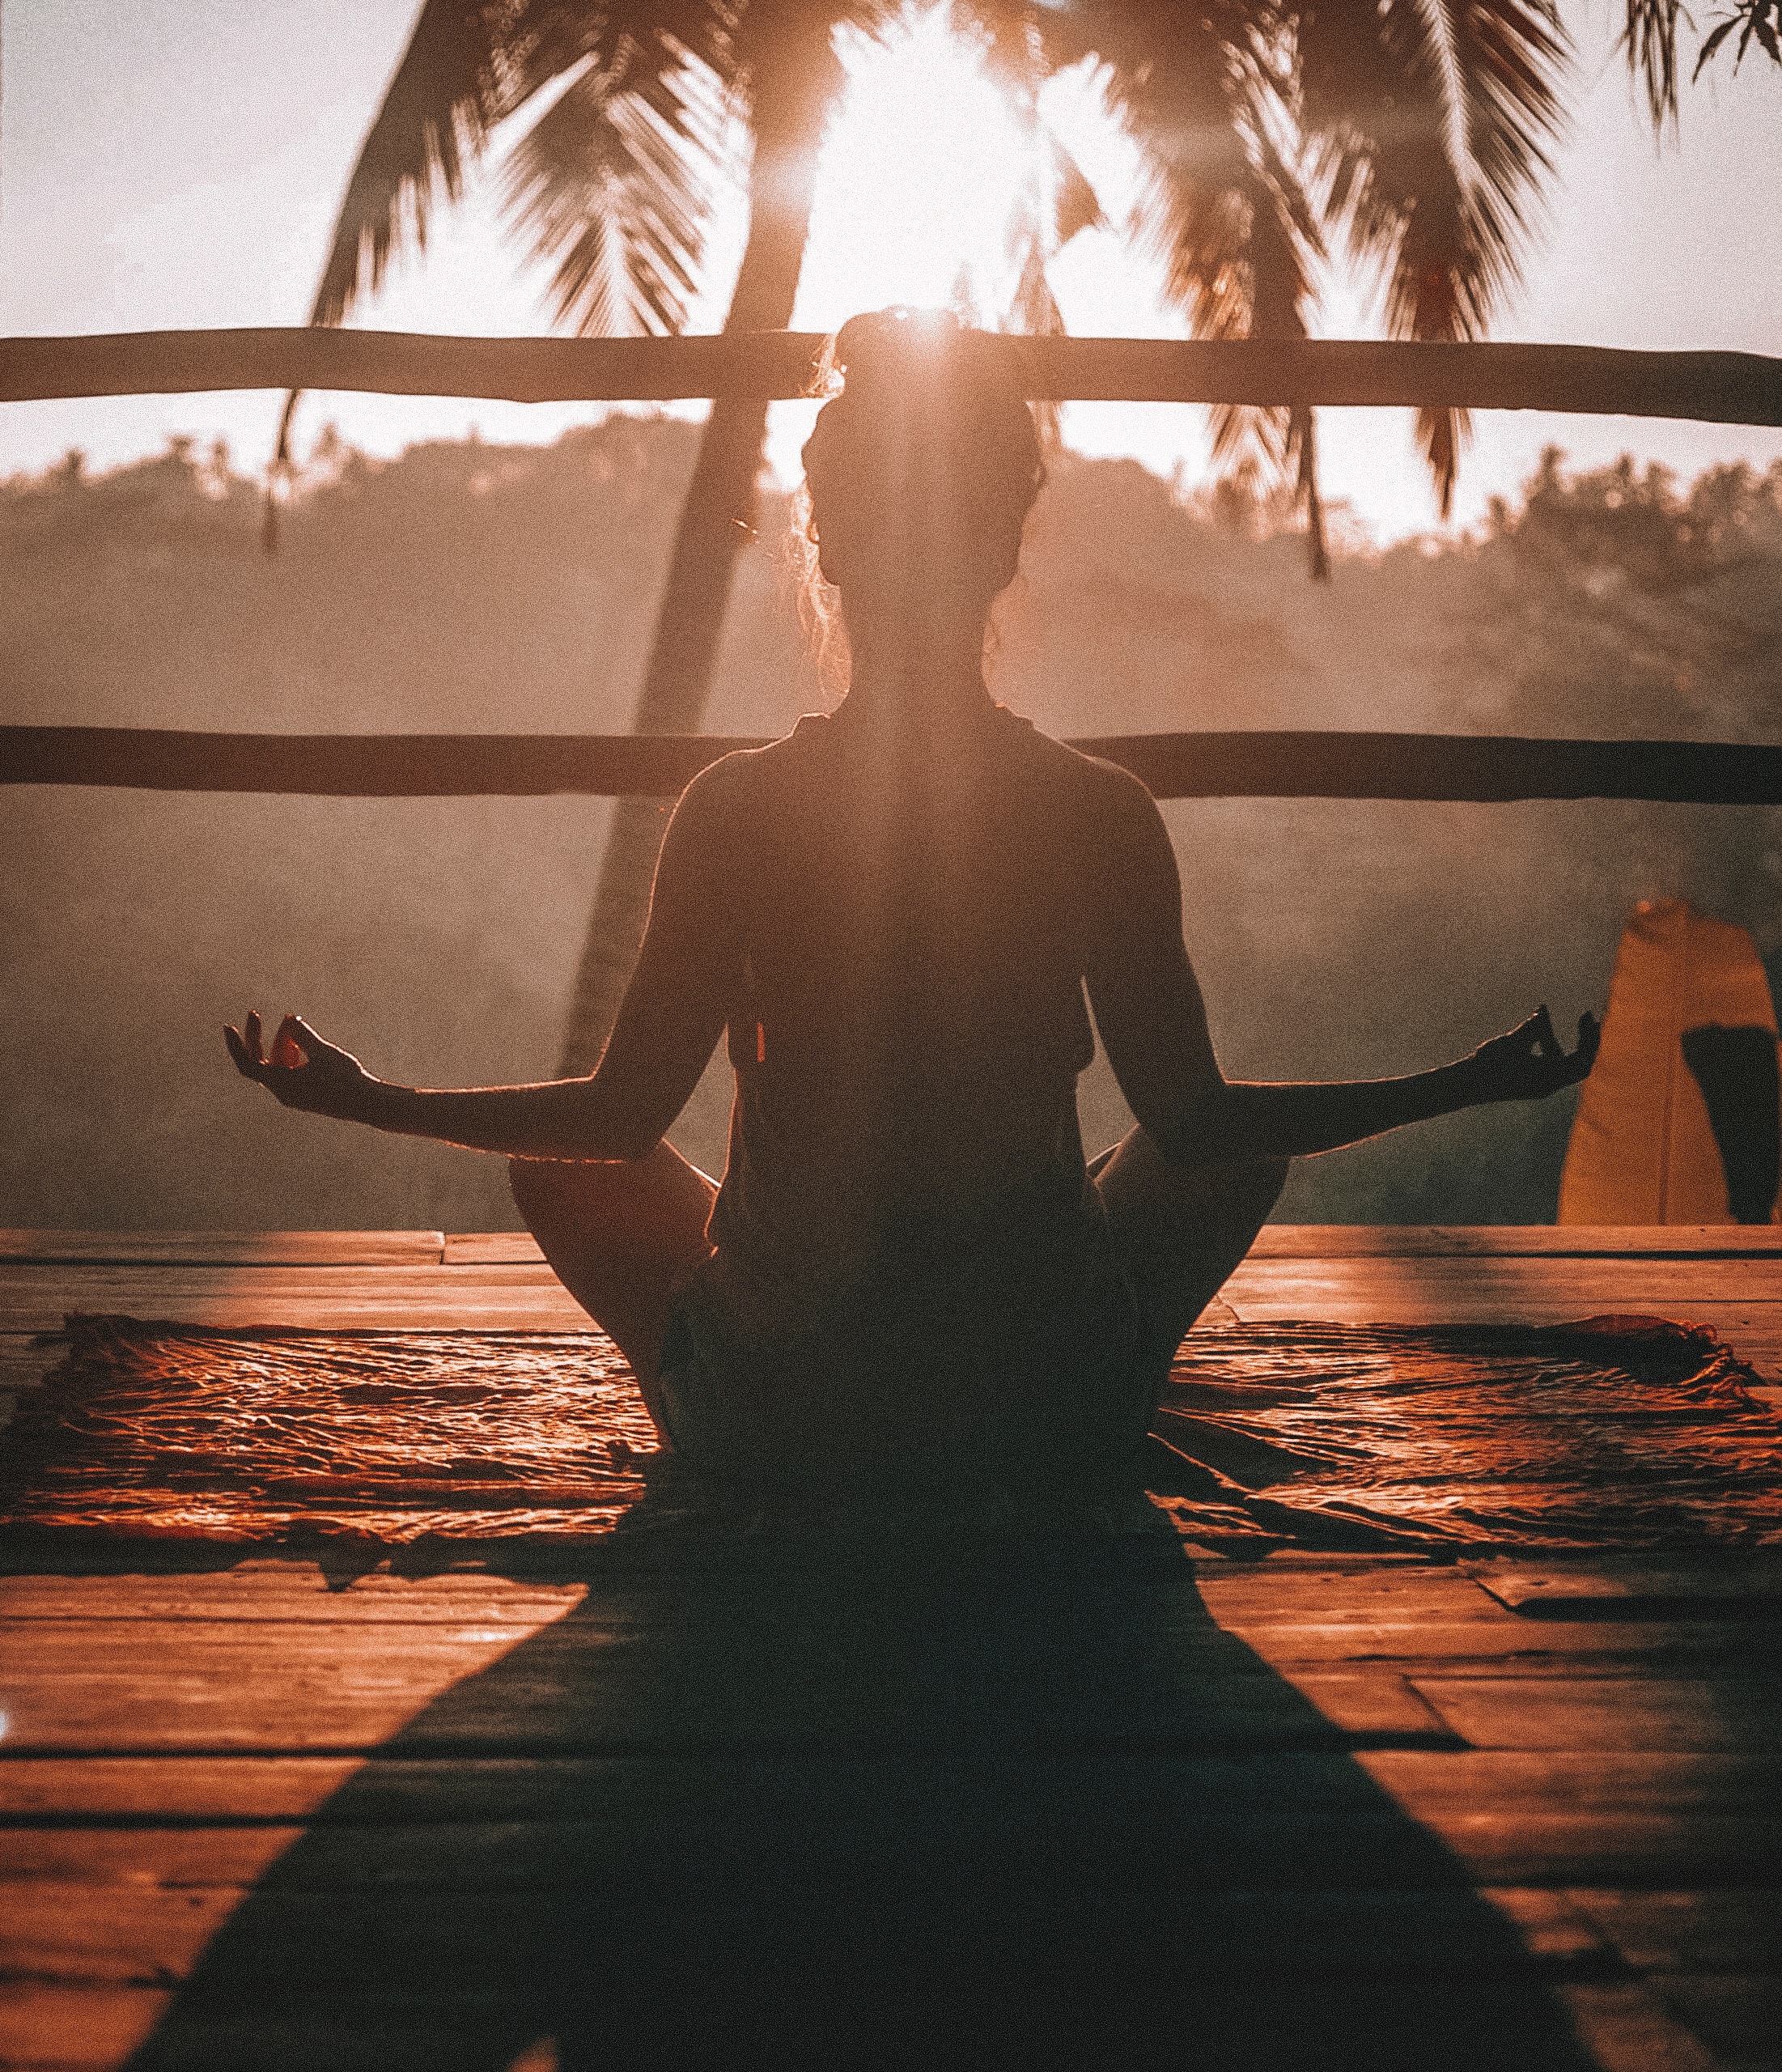 Woman meditating with palm tree and sun in the background